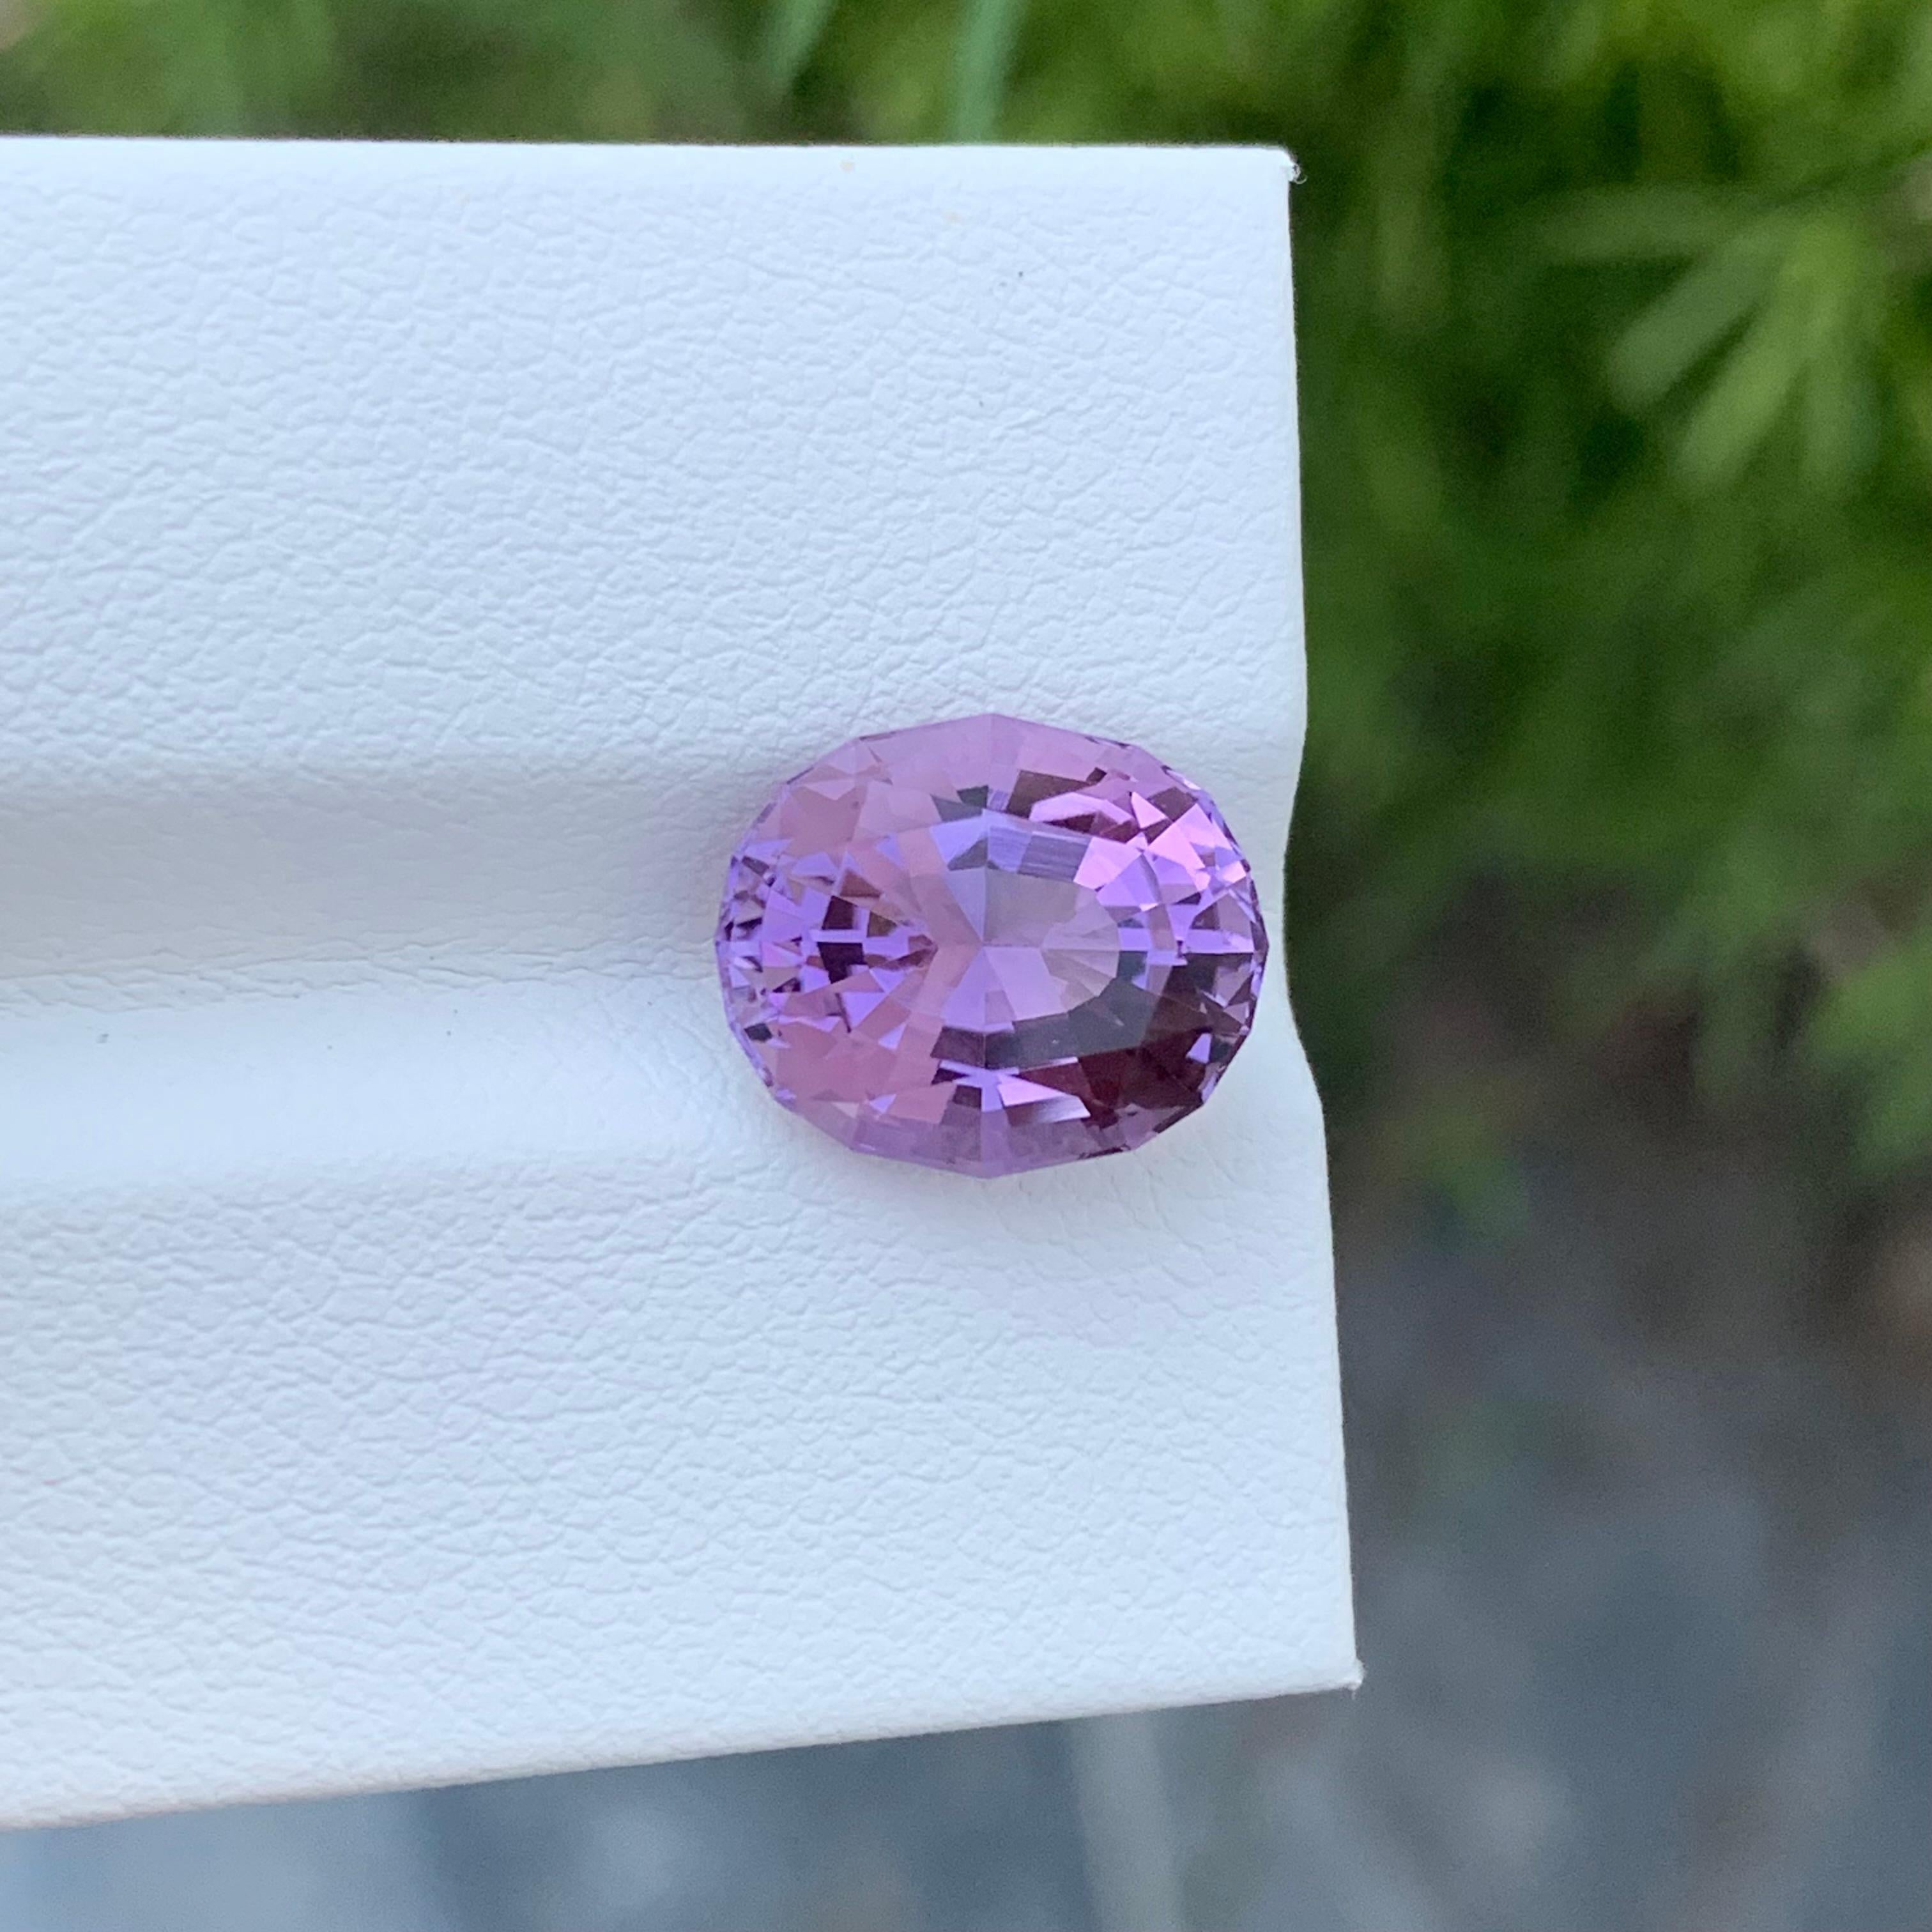 Loose Amethyst
Weight: 4.25 Carats
Dimension: 11.7 x 9.8 x 7 Mm
Colour: Purple
Origin: Brazil
Treatment: Non
Certificate: On Demand
Shape: Oval 

Amethyst, a stunning variety of quartz known for its mesmerizing purple hue, has captivated humans for